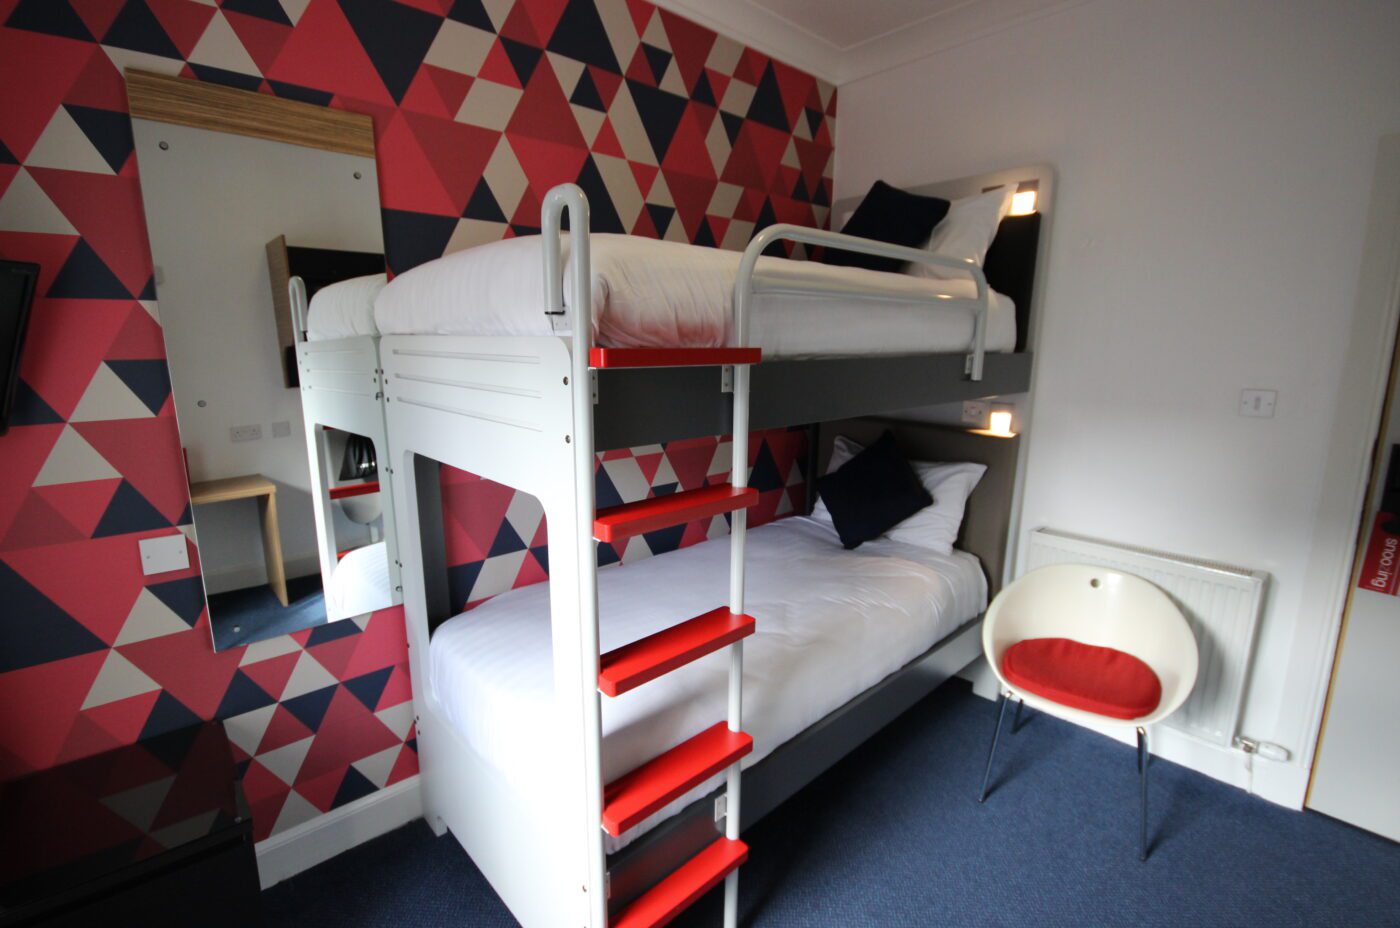 Cabin room with bunk beds and a mirror.